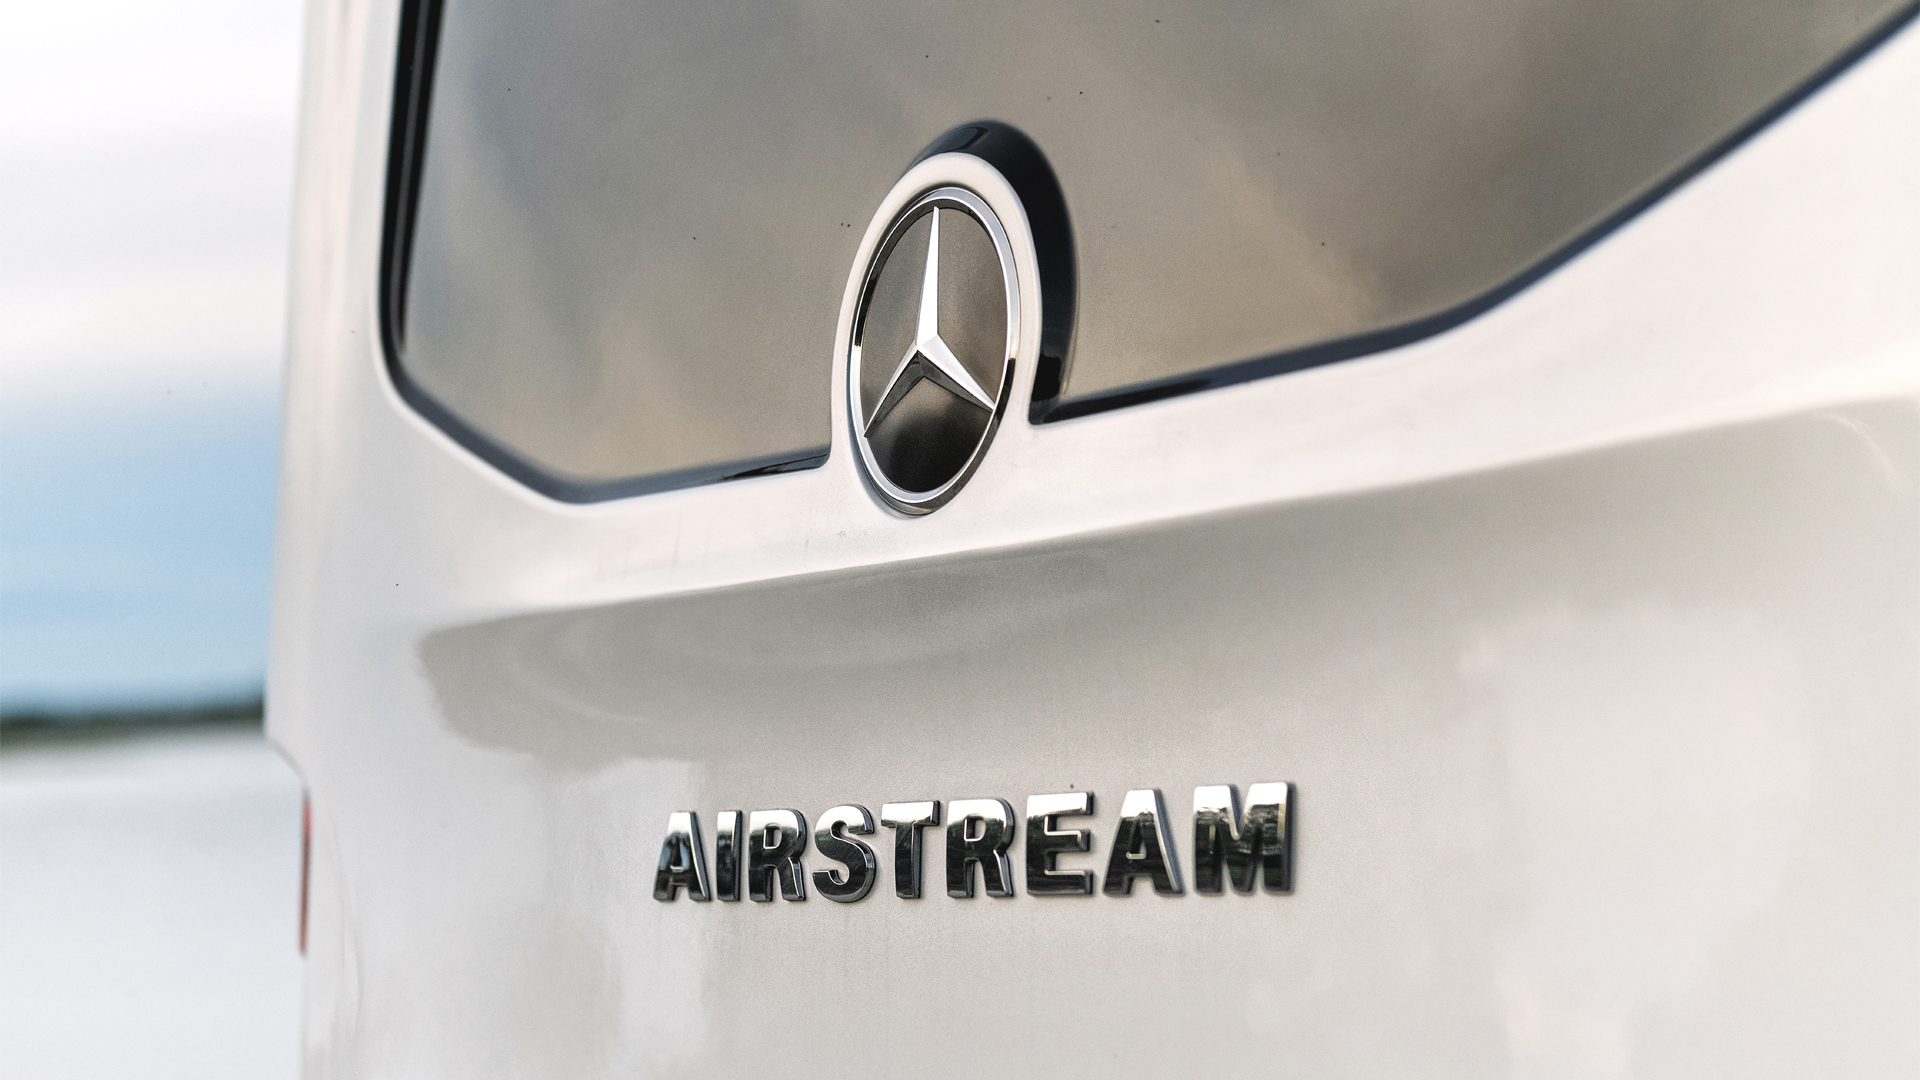 Airstream and Mercedes-Benz logos on an Airstream Atlas